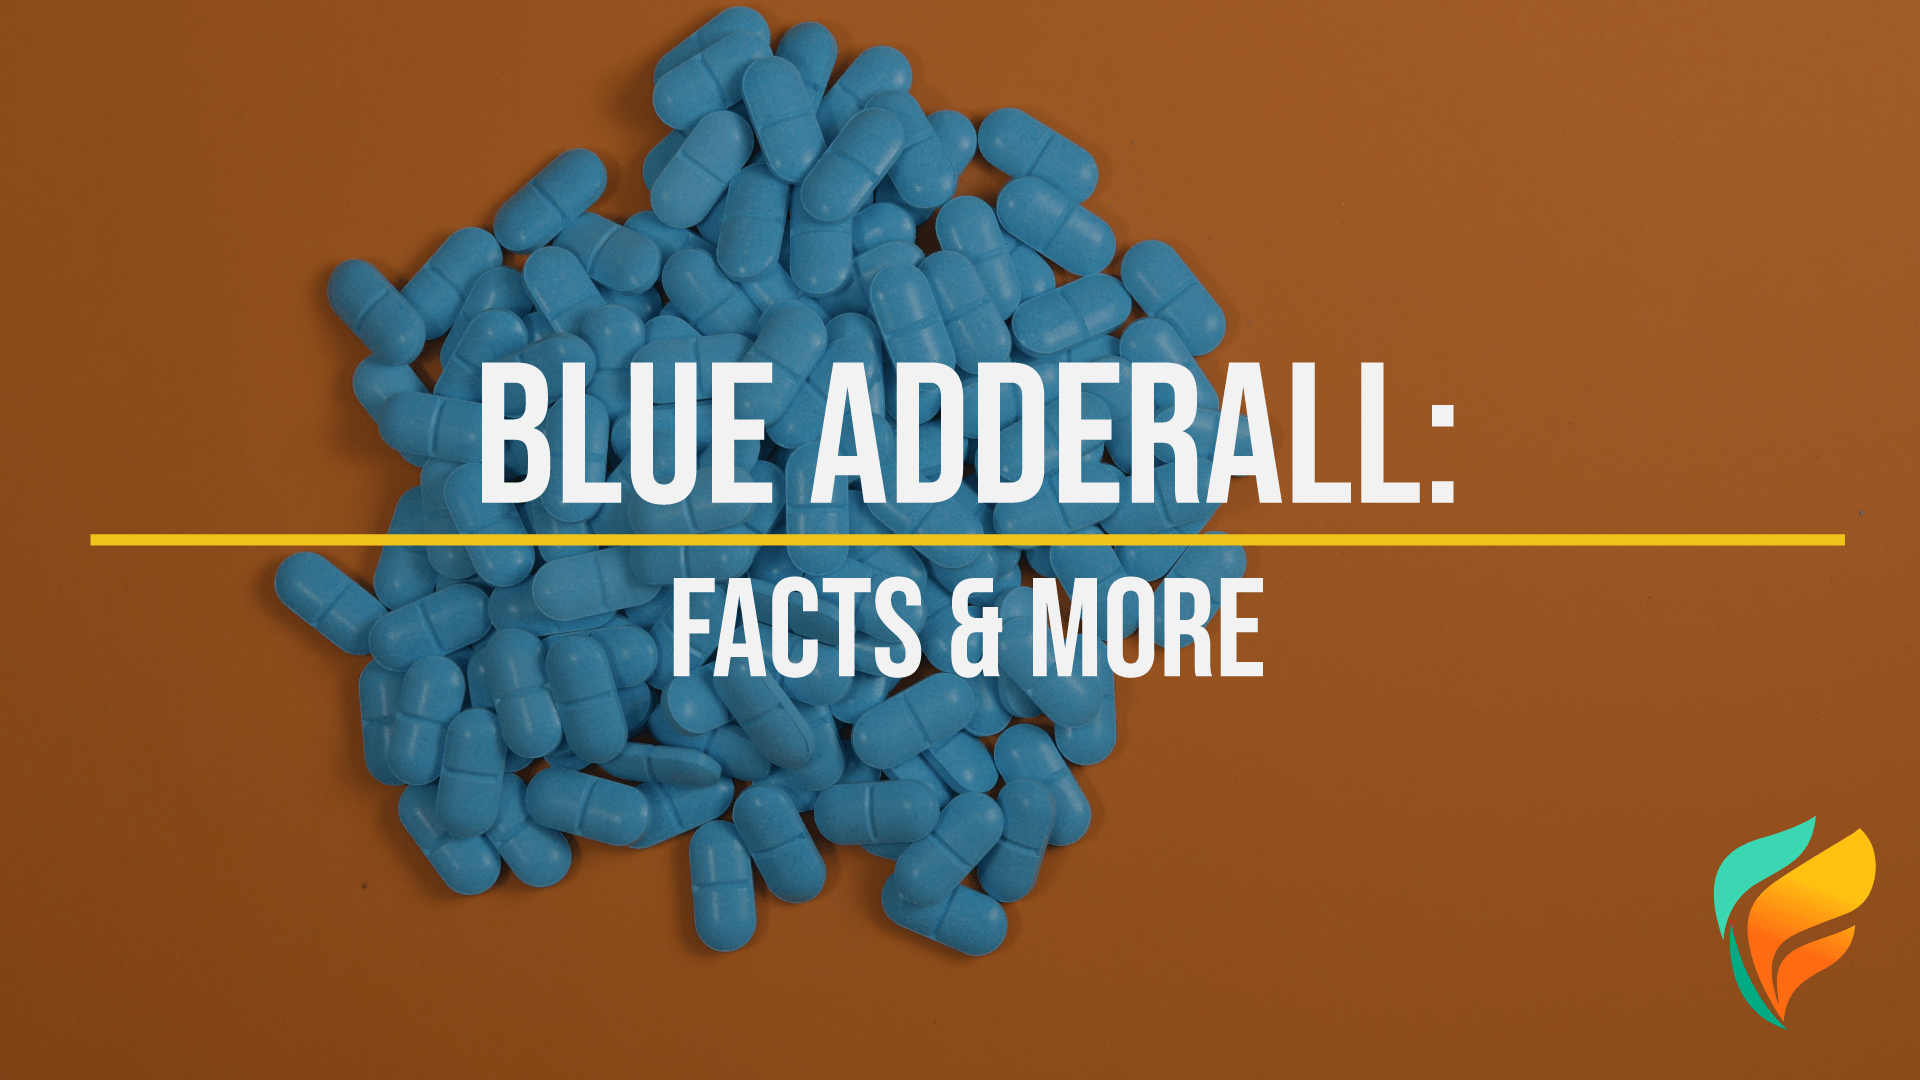 Modafinil Vs Adderall: Which Is More Effective For Focus And Concentration?